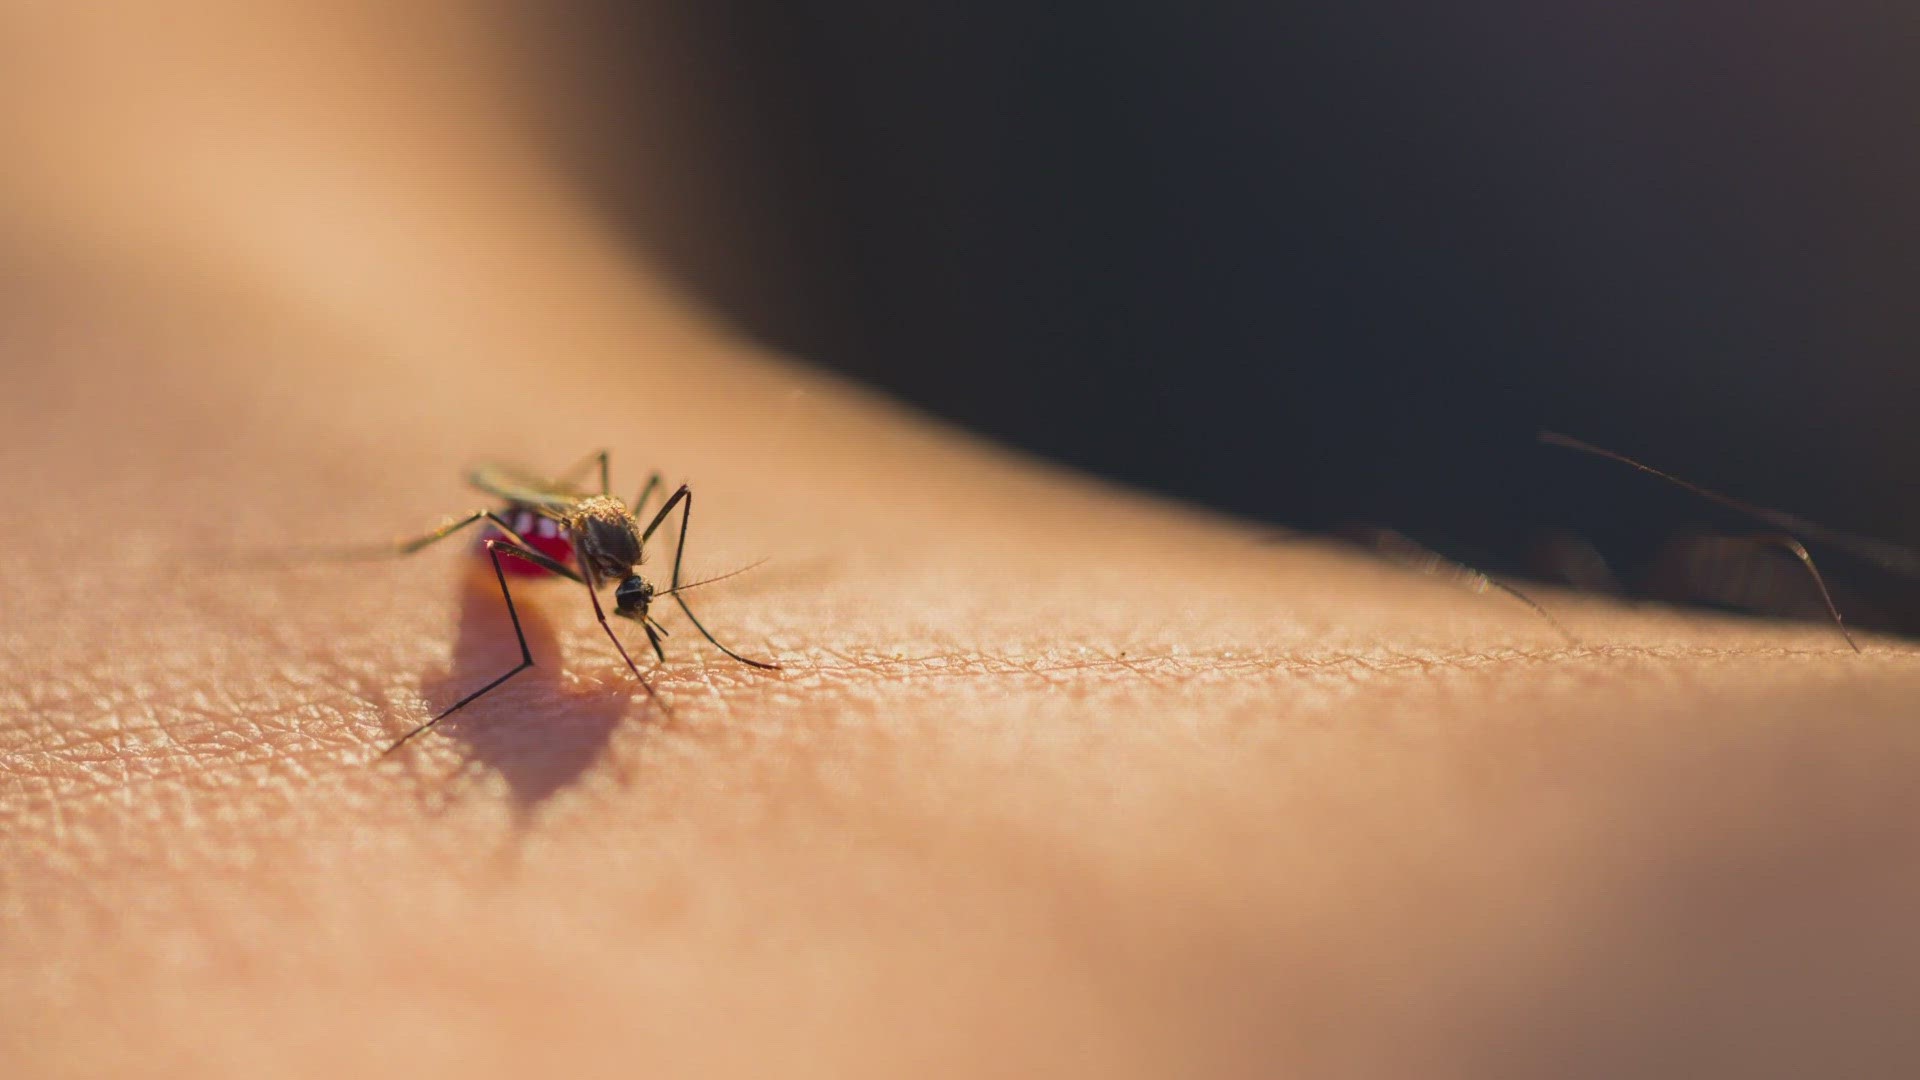 Scientists say people with a plant-based diet may be less likely to attract mosquitos.